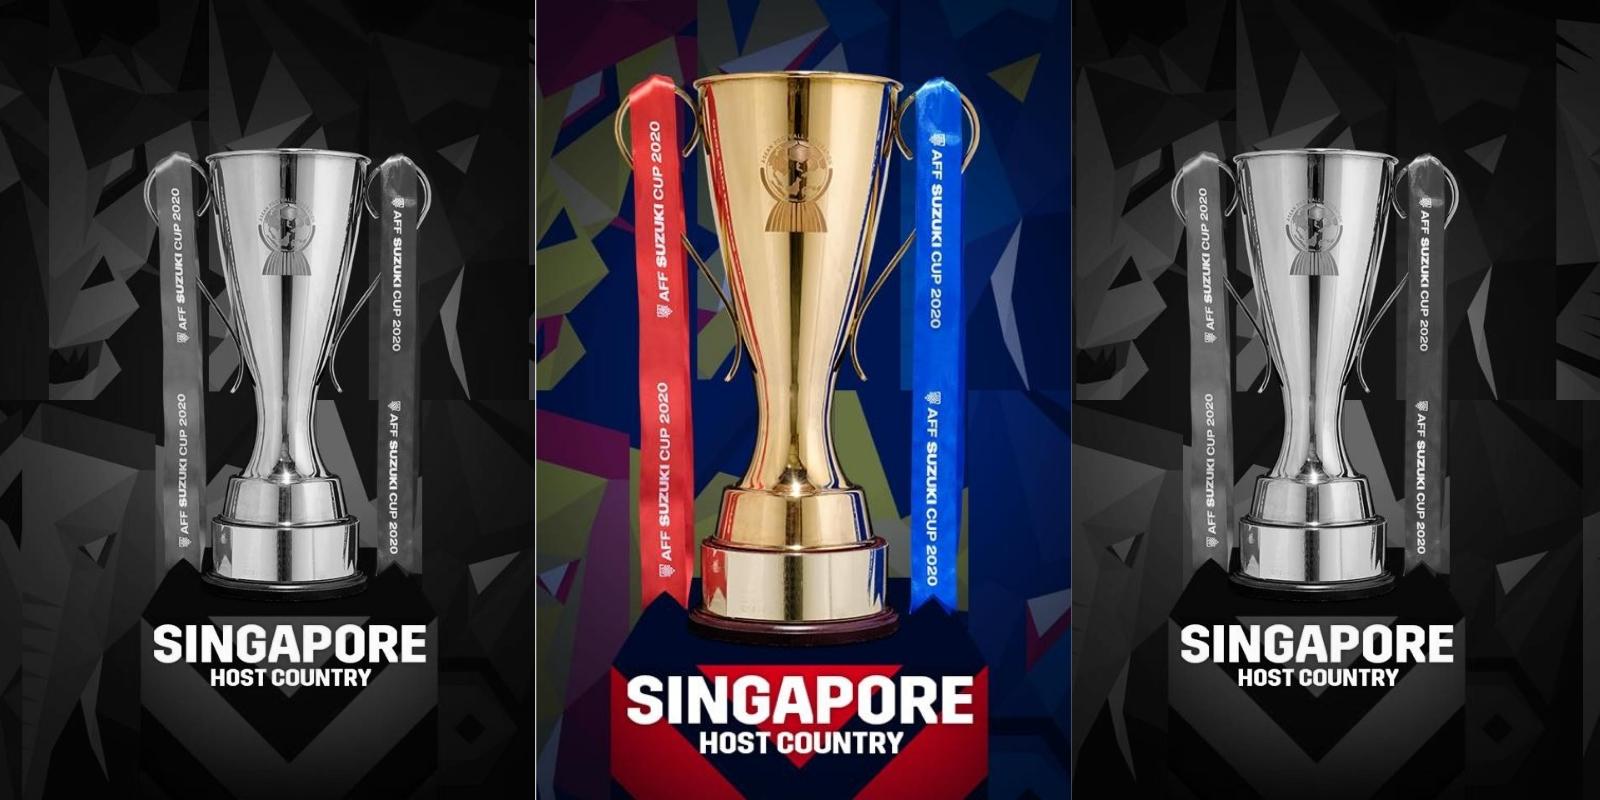 Singapore appointed as host for 2020 AFF Suzuki Cup │ GMA News Online